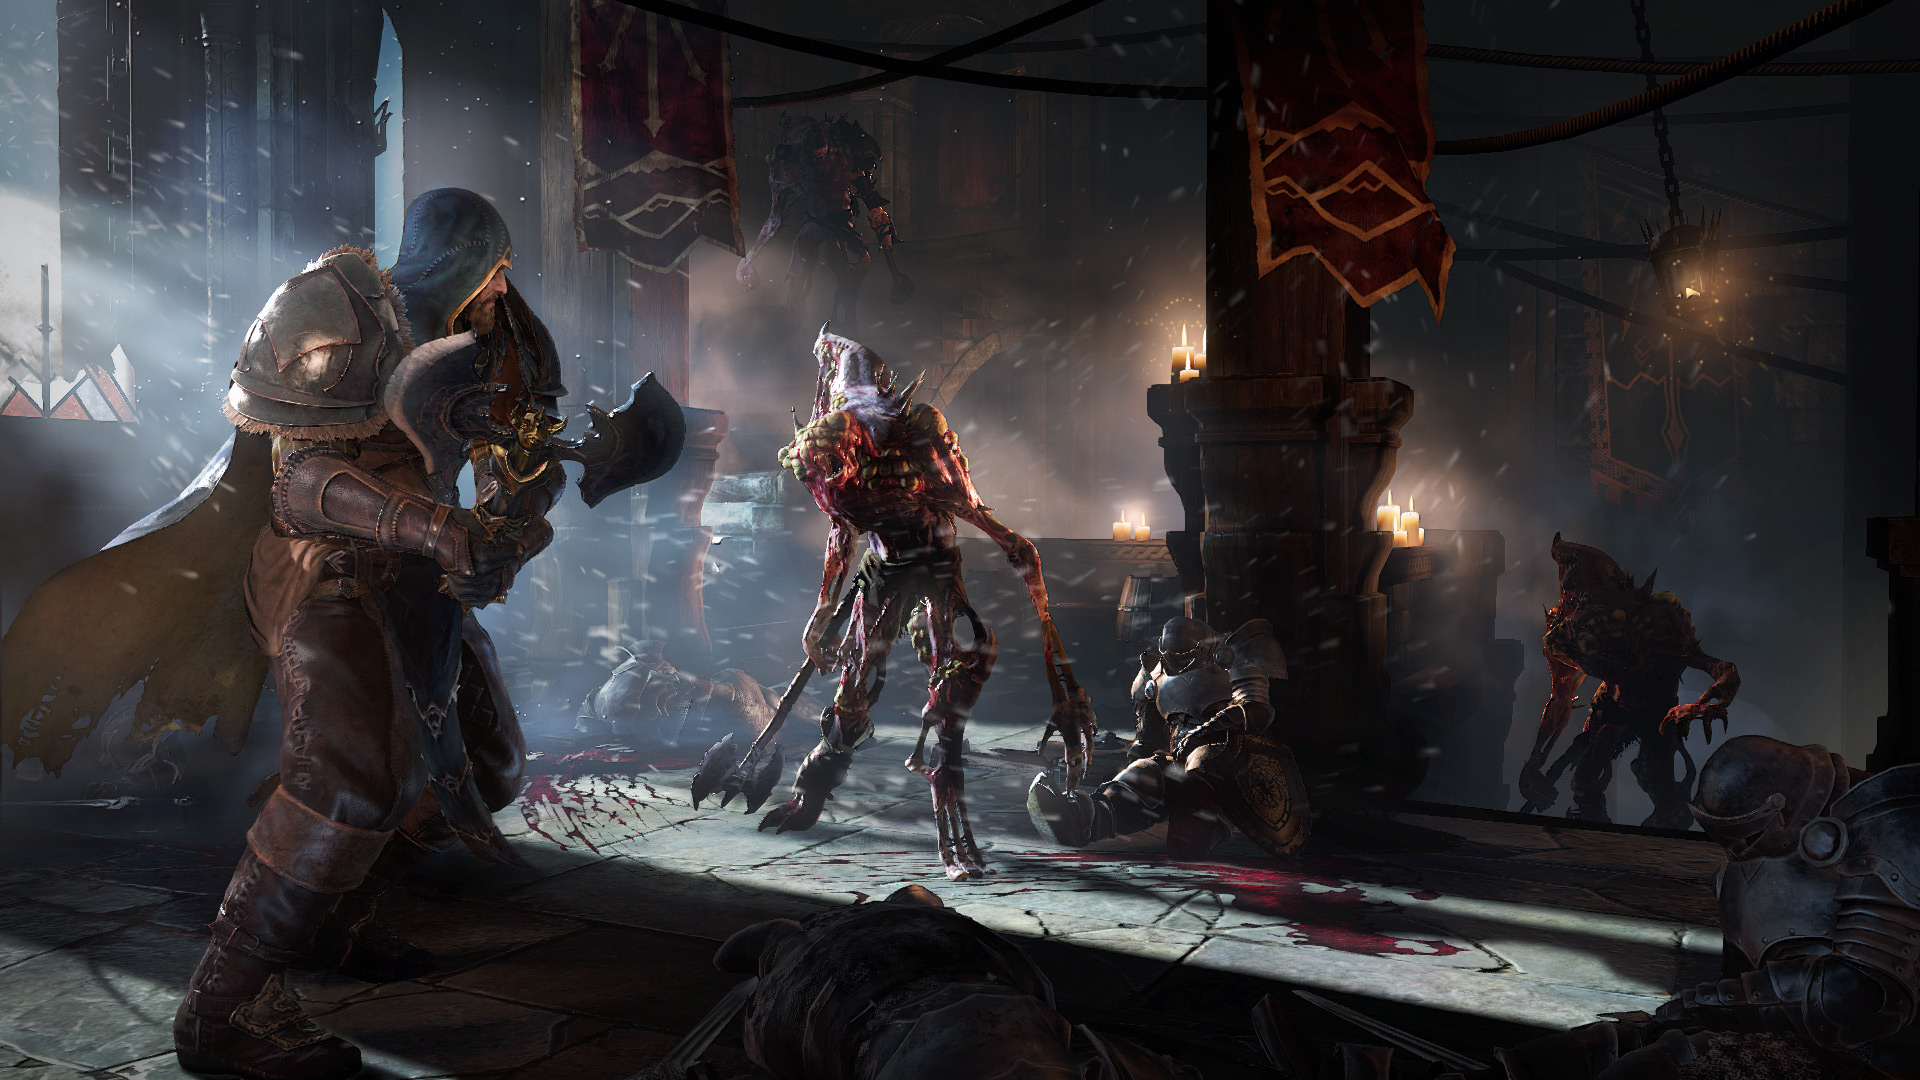 download The Lords of the Fallen